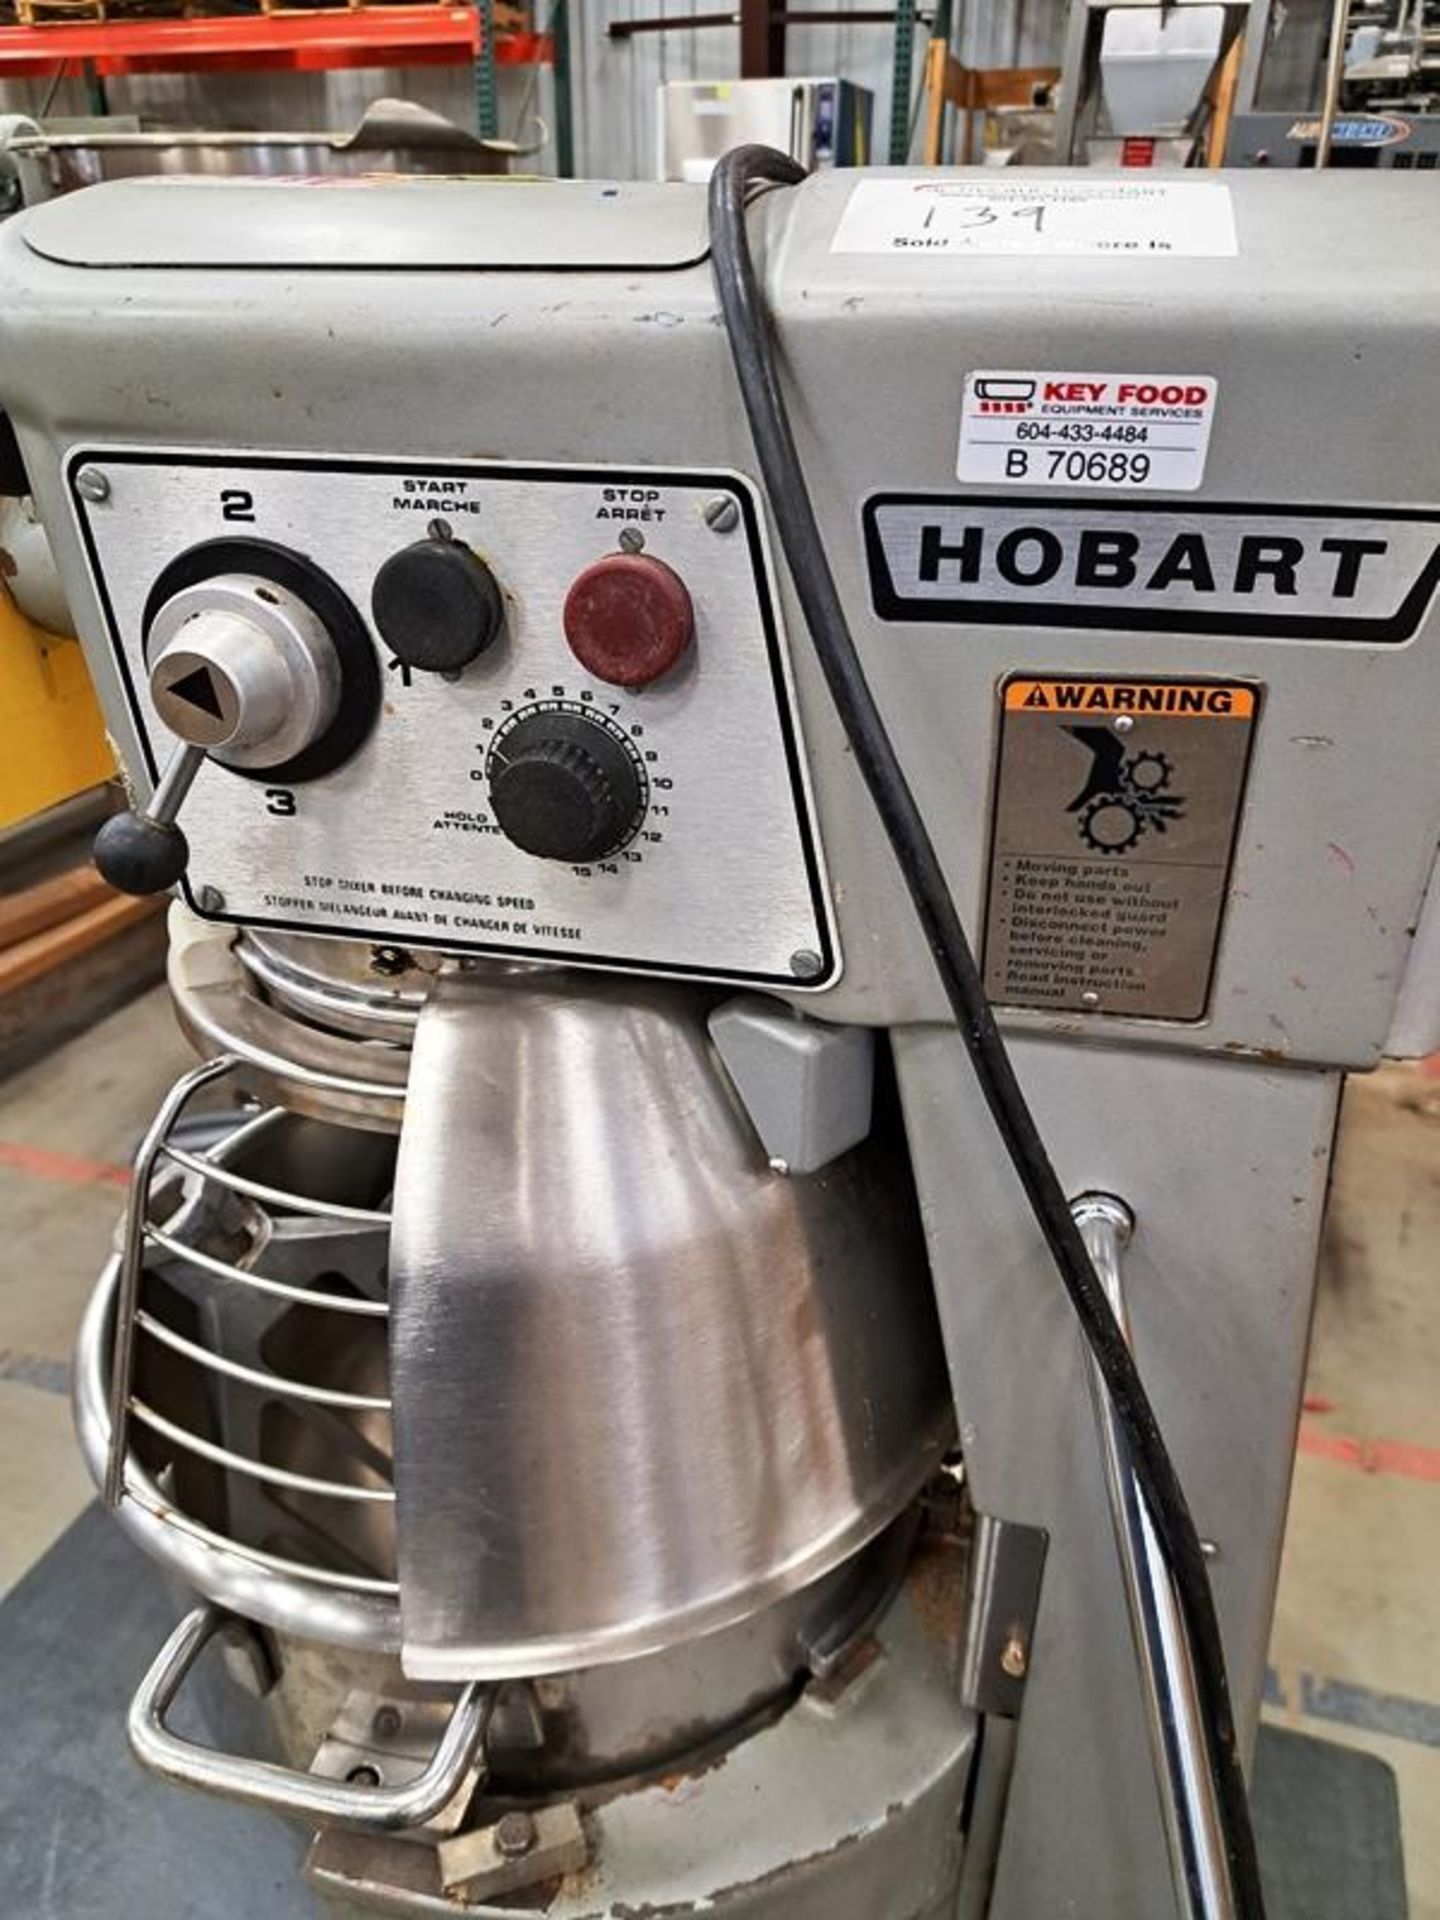 Hobart Mdl. D-300T Stand Mixer, 30 quart, Ser. #99-230-017, with paddle, dough hook and whisk ( - Image 4 of 5